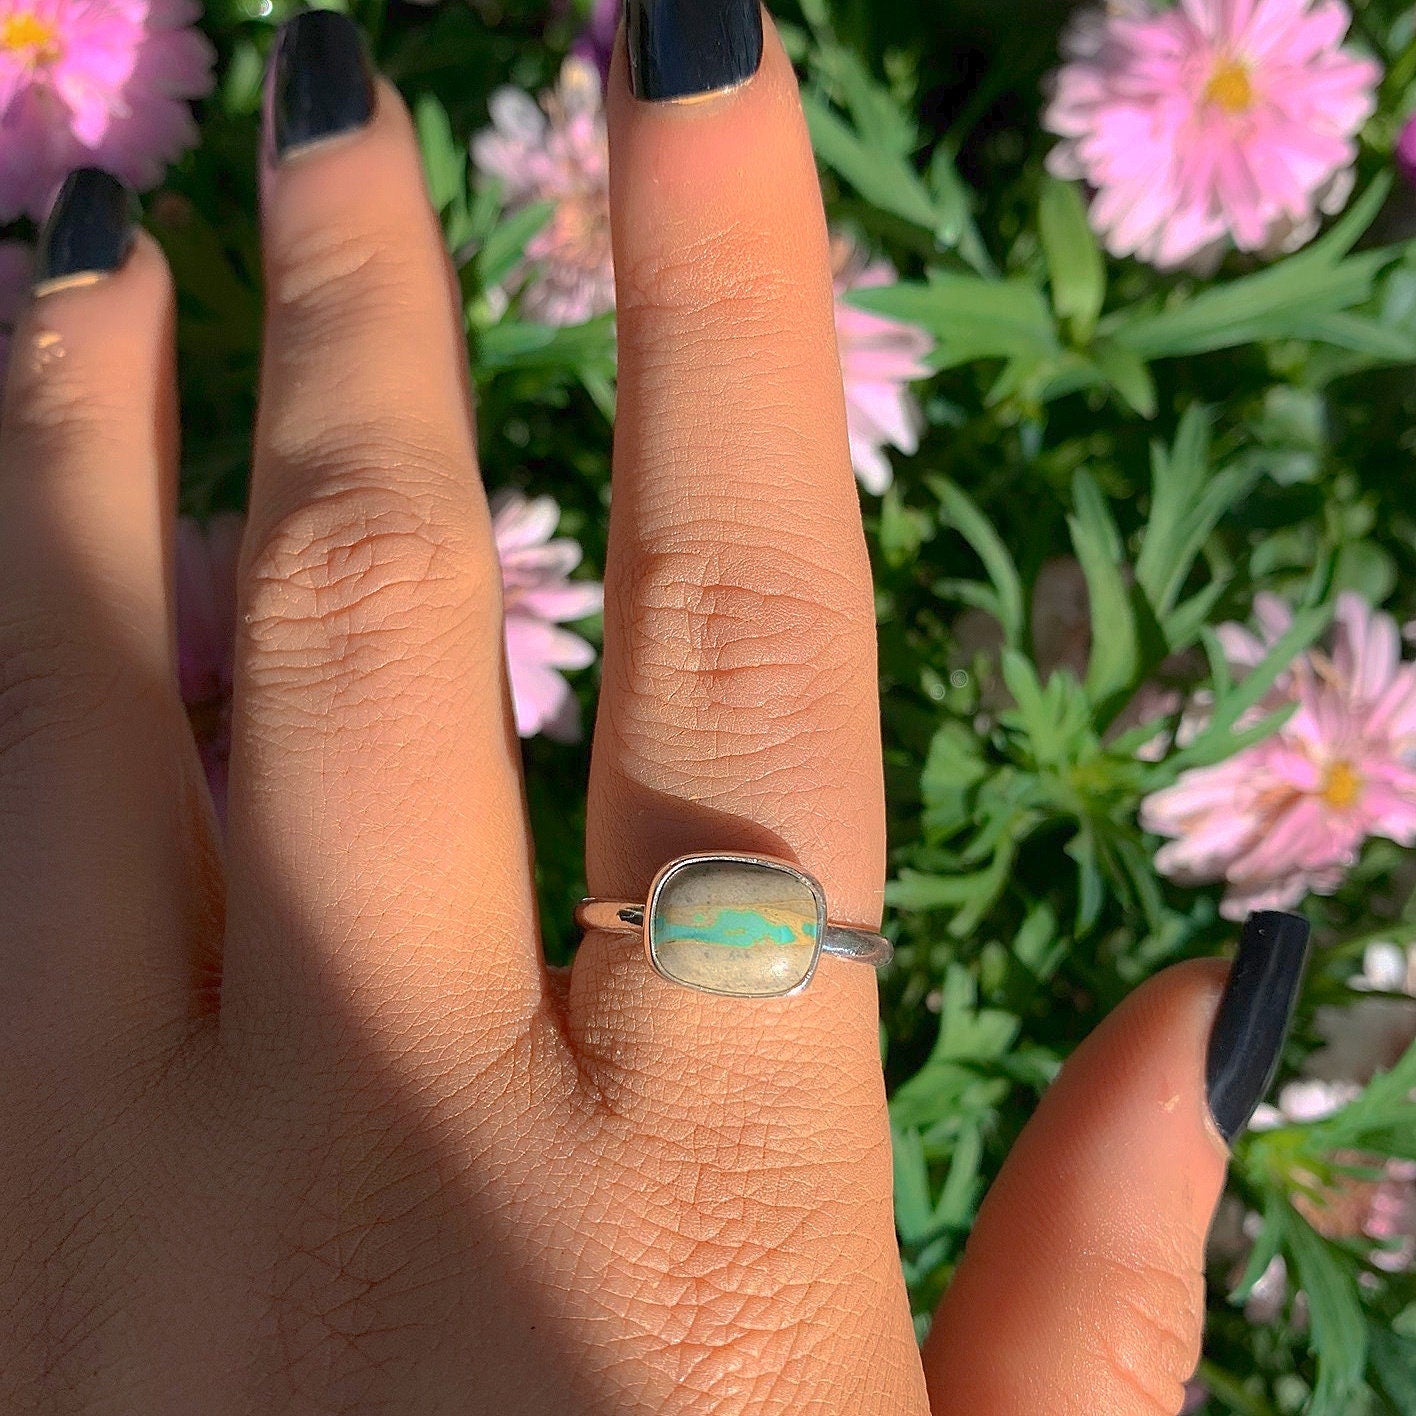 Royston Ribbon Turquoise Ring - Size 9 to 9 1/4 - Sterling Silver - Ribbon Turquoise Jewellery - Genuine Turquoise Ring - Blue & Brown